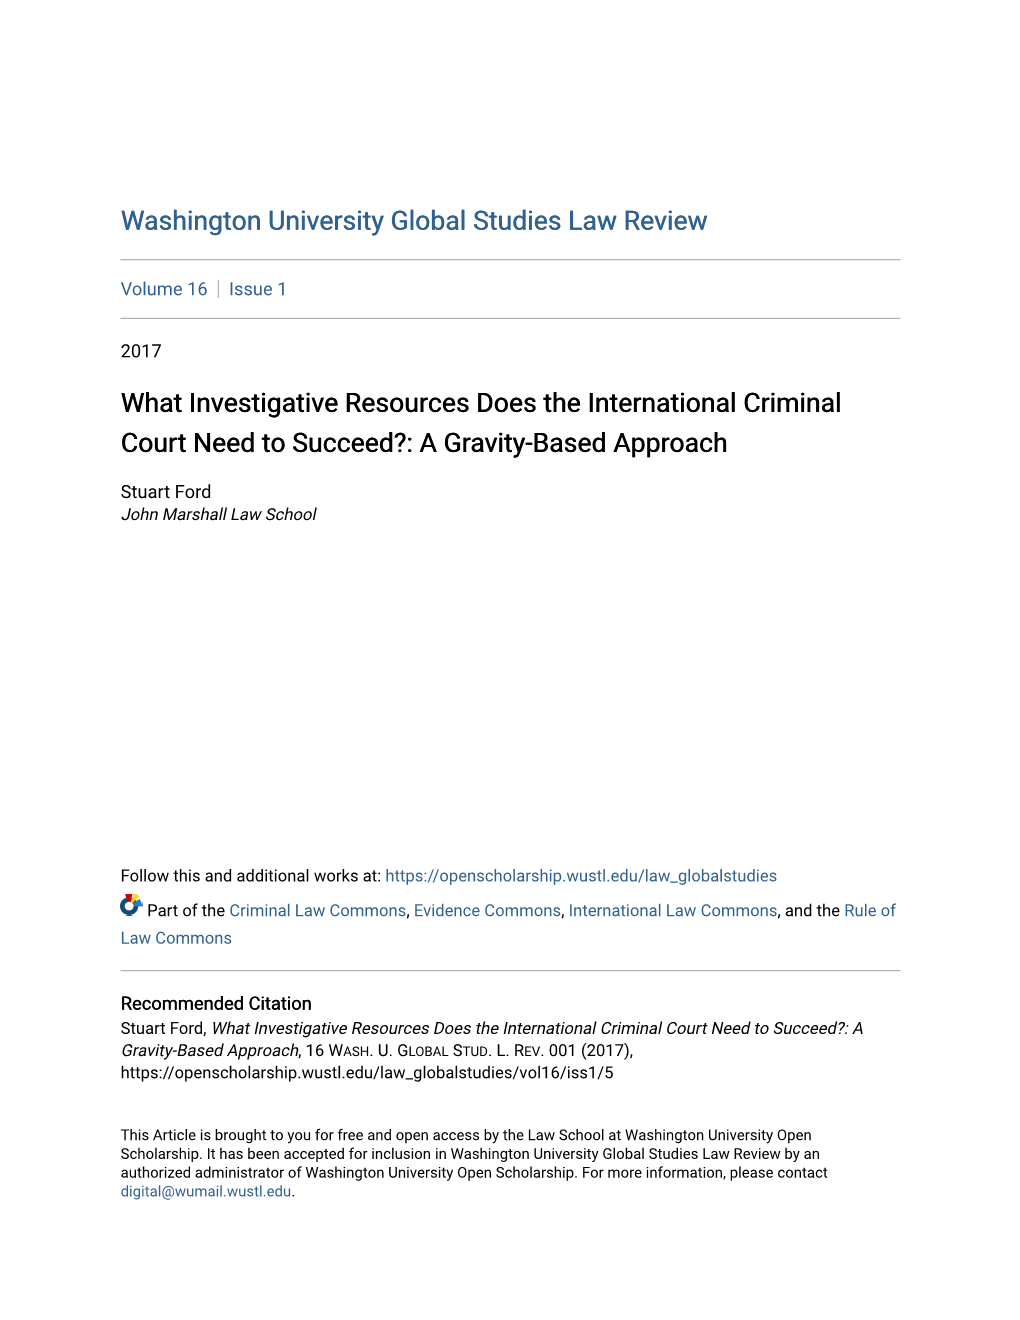 What Investigative Resources Does the International Criminal Court Need to Succeed?: a Gravity-Based Approach